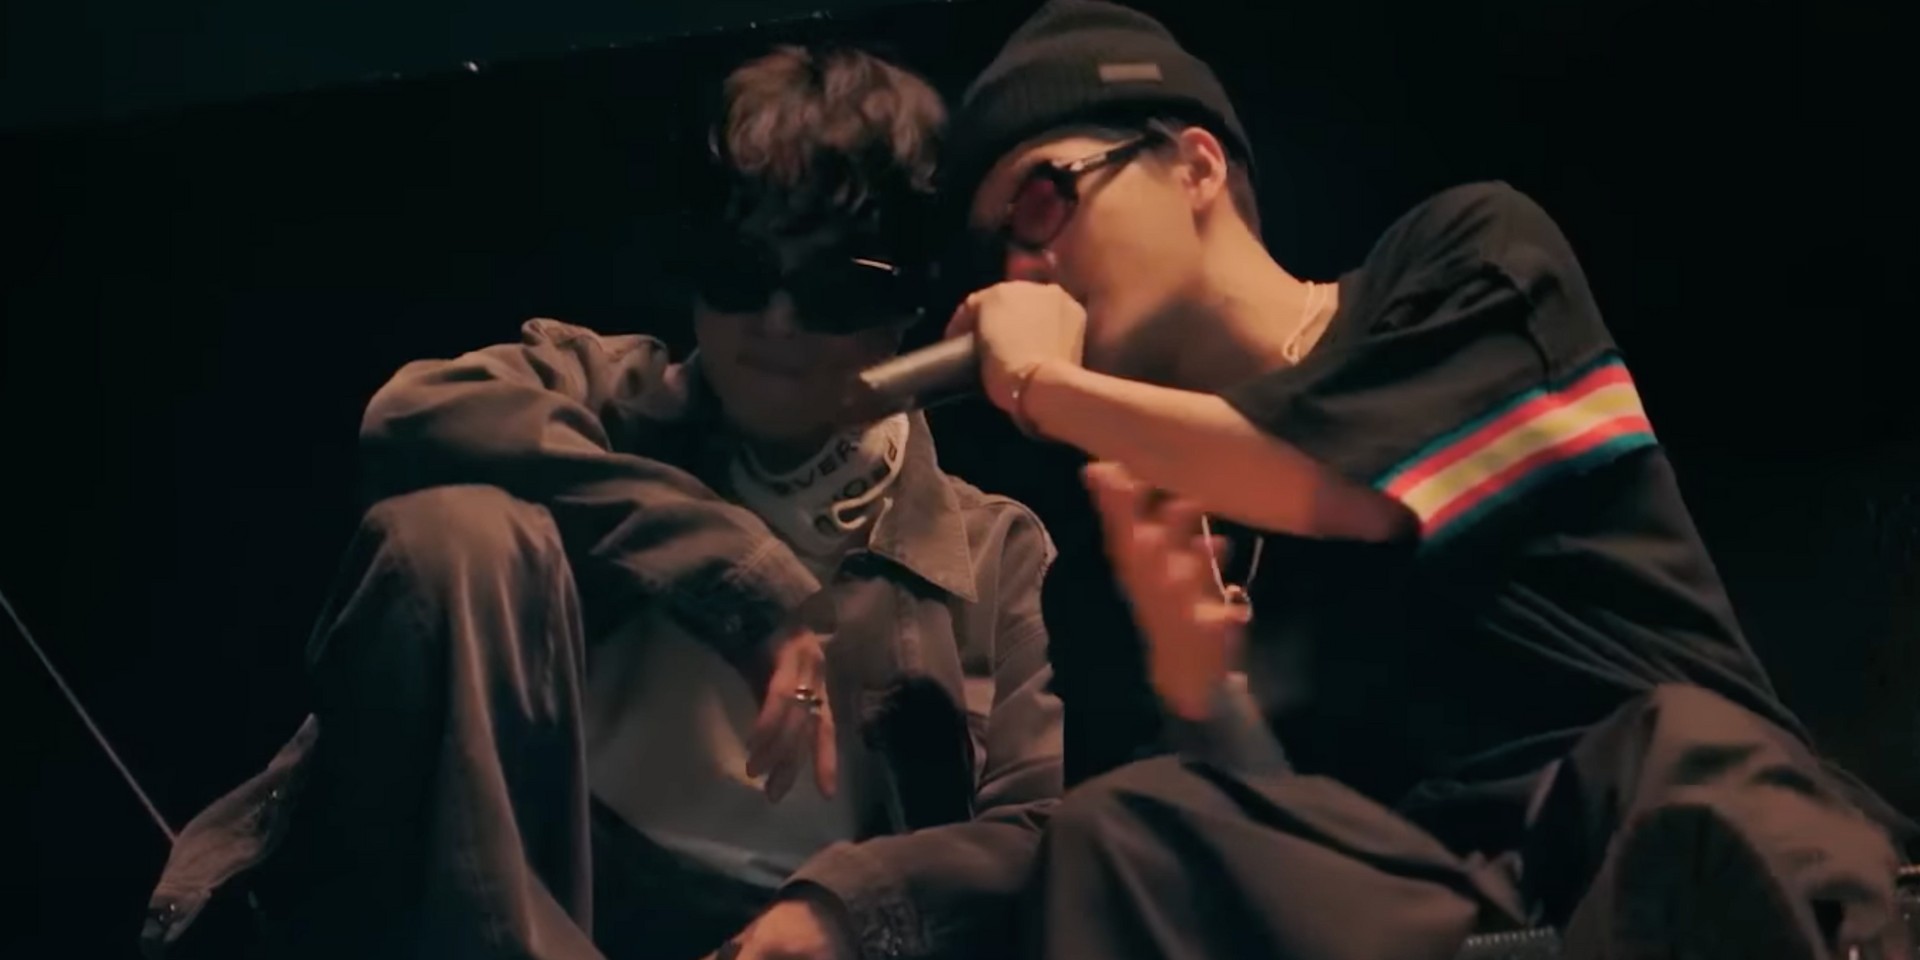 Jackson Wang and EPIK HIGH's Tablo team up in 'Imagine' for 'Rap of China' – watch